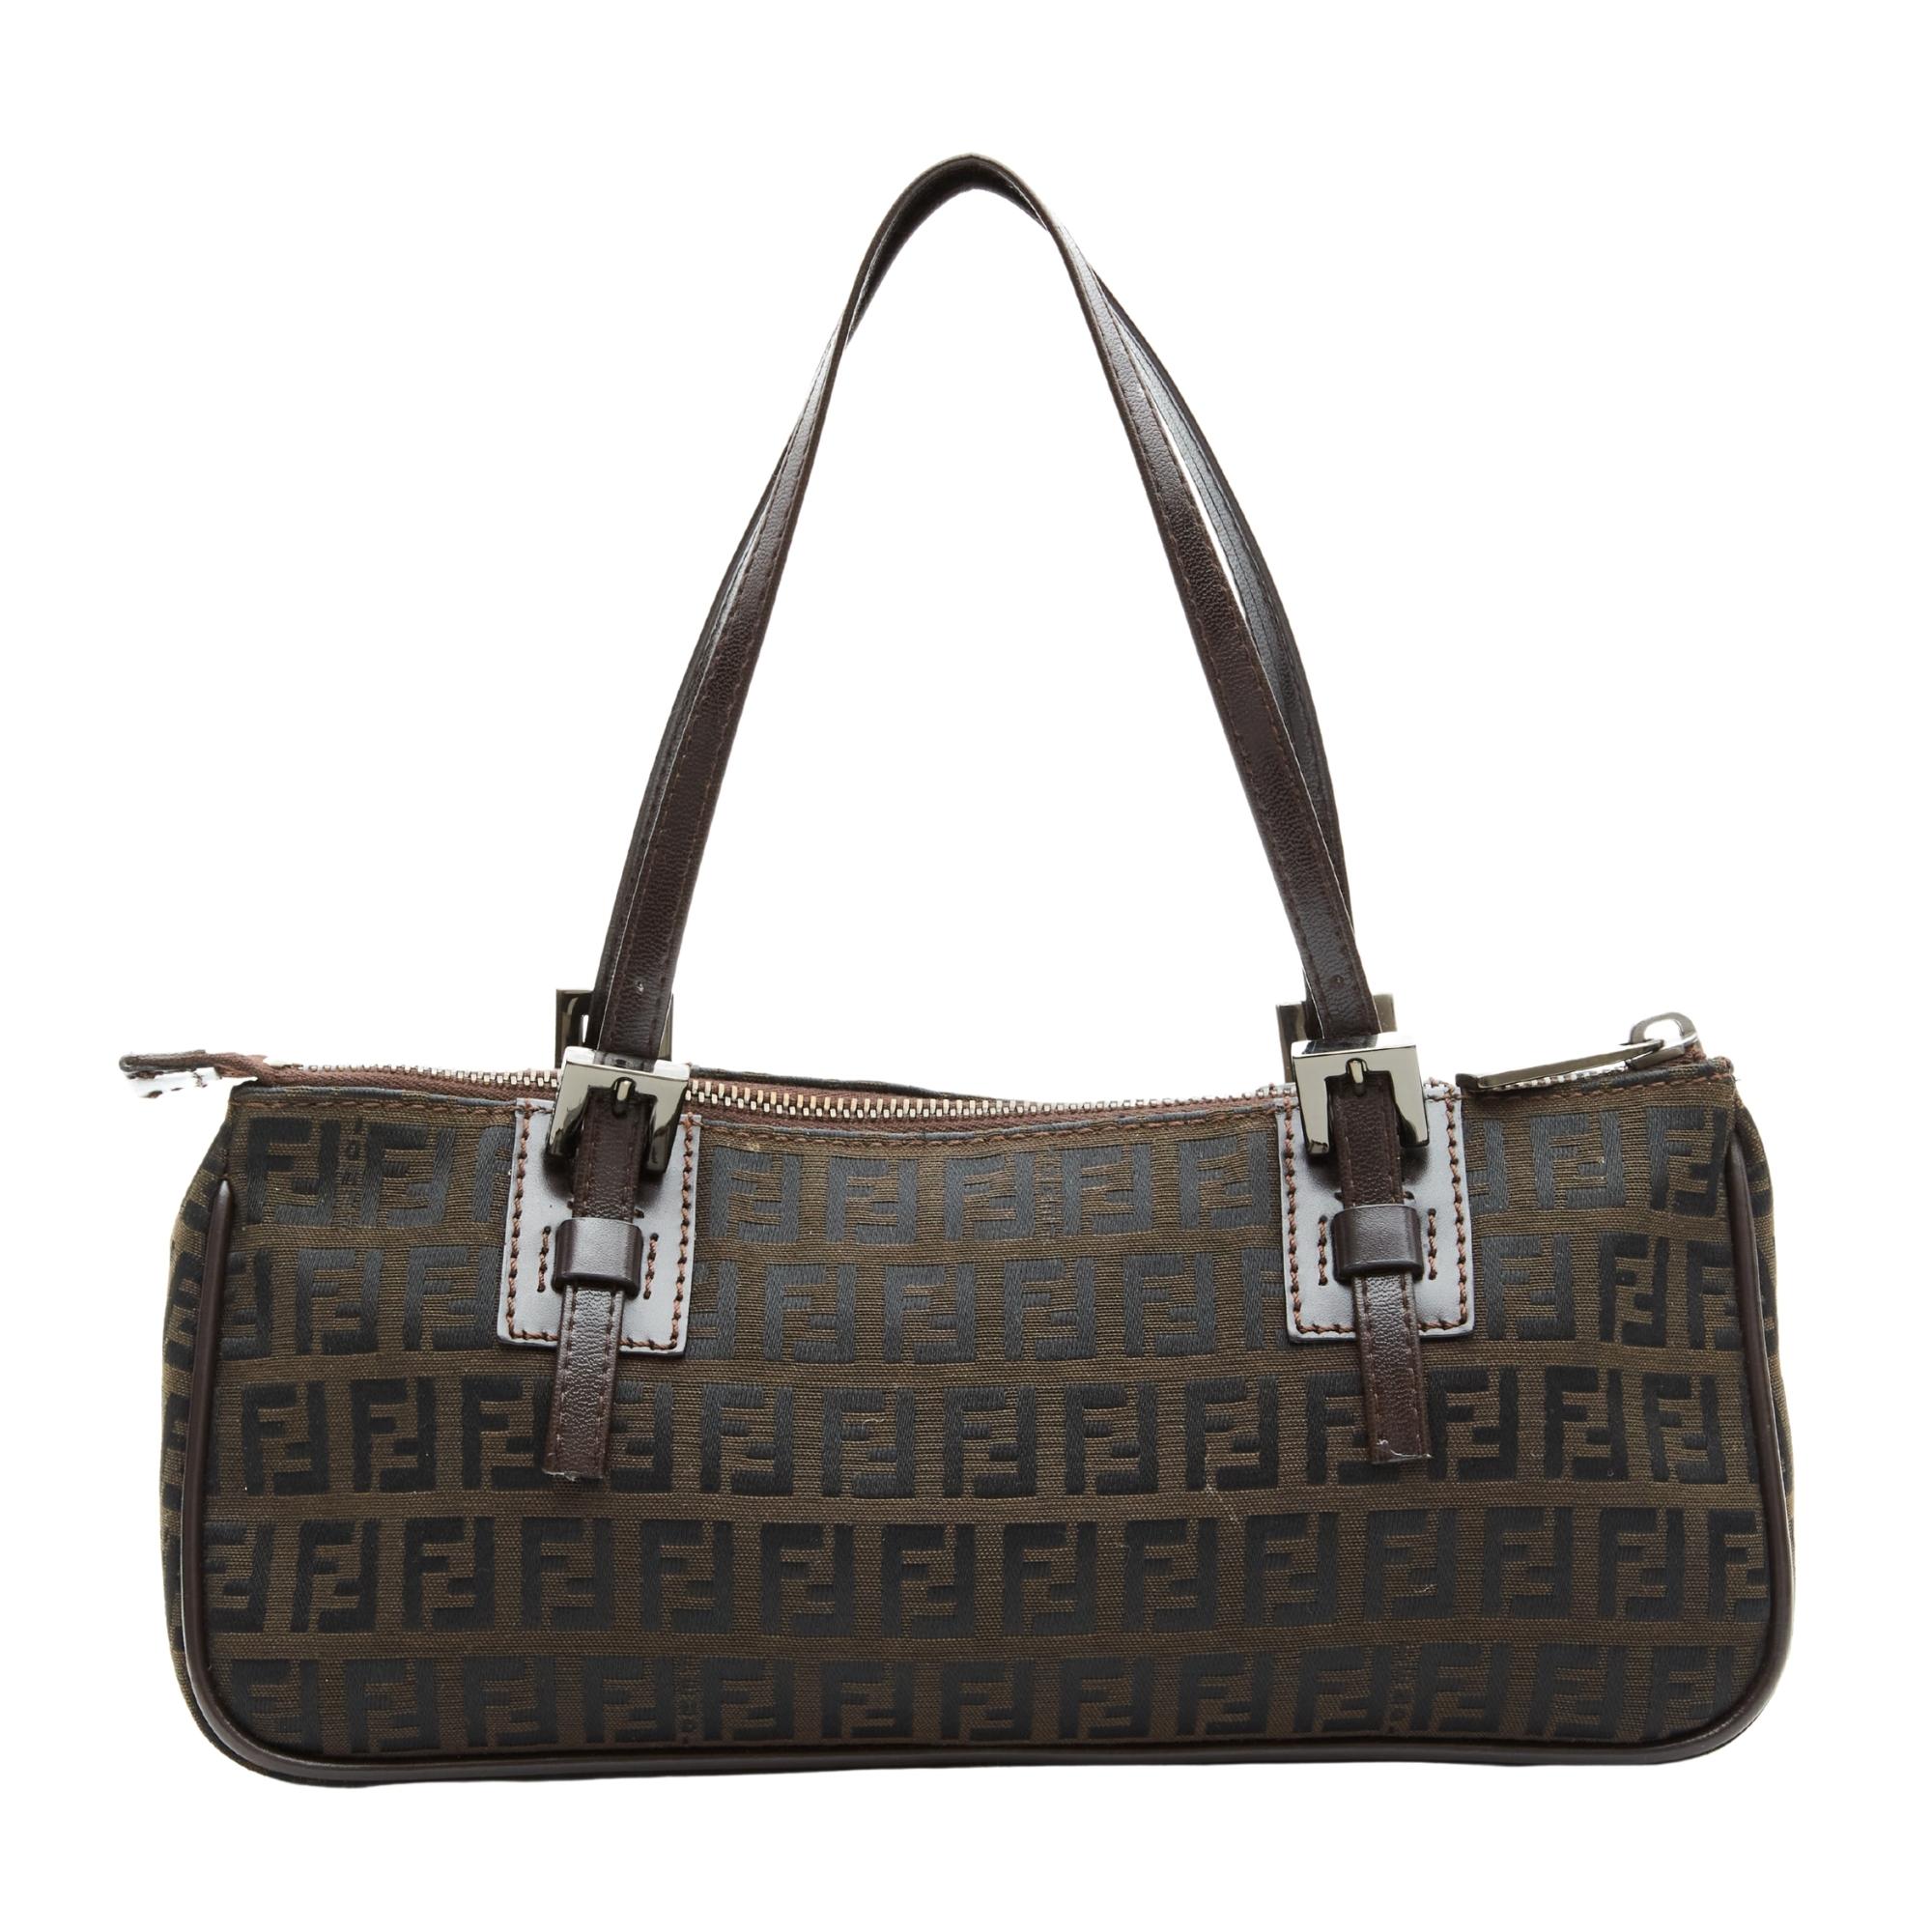 This handbag is made with brown canvas with zucca monogram embroidery throughout. The bag features leather trim, adjustable dual flat leather top handles, top zip closure and an interior zip pocket.

COLOR: Dark brown monogram Zucca
MATERIAL: Canvas